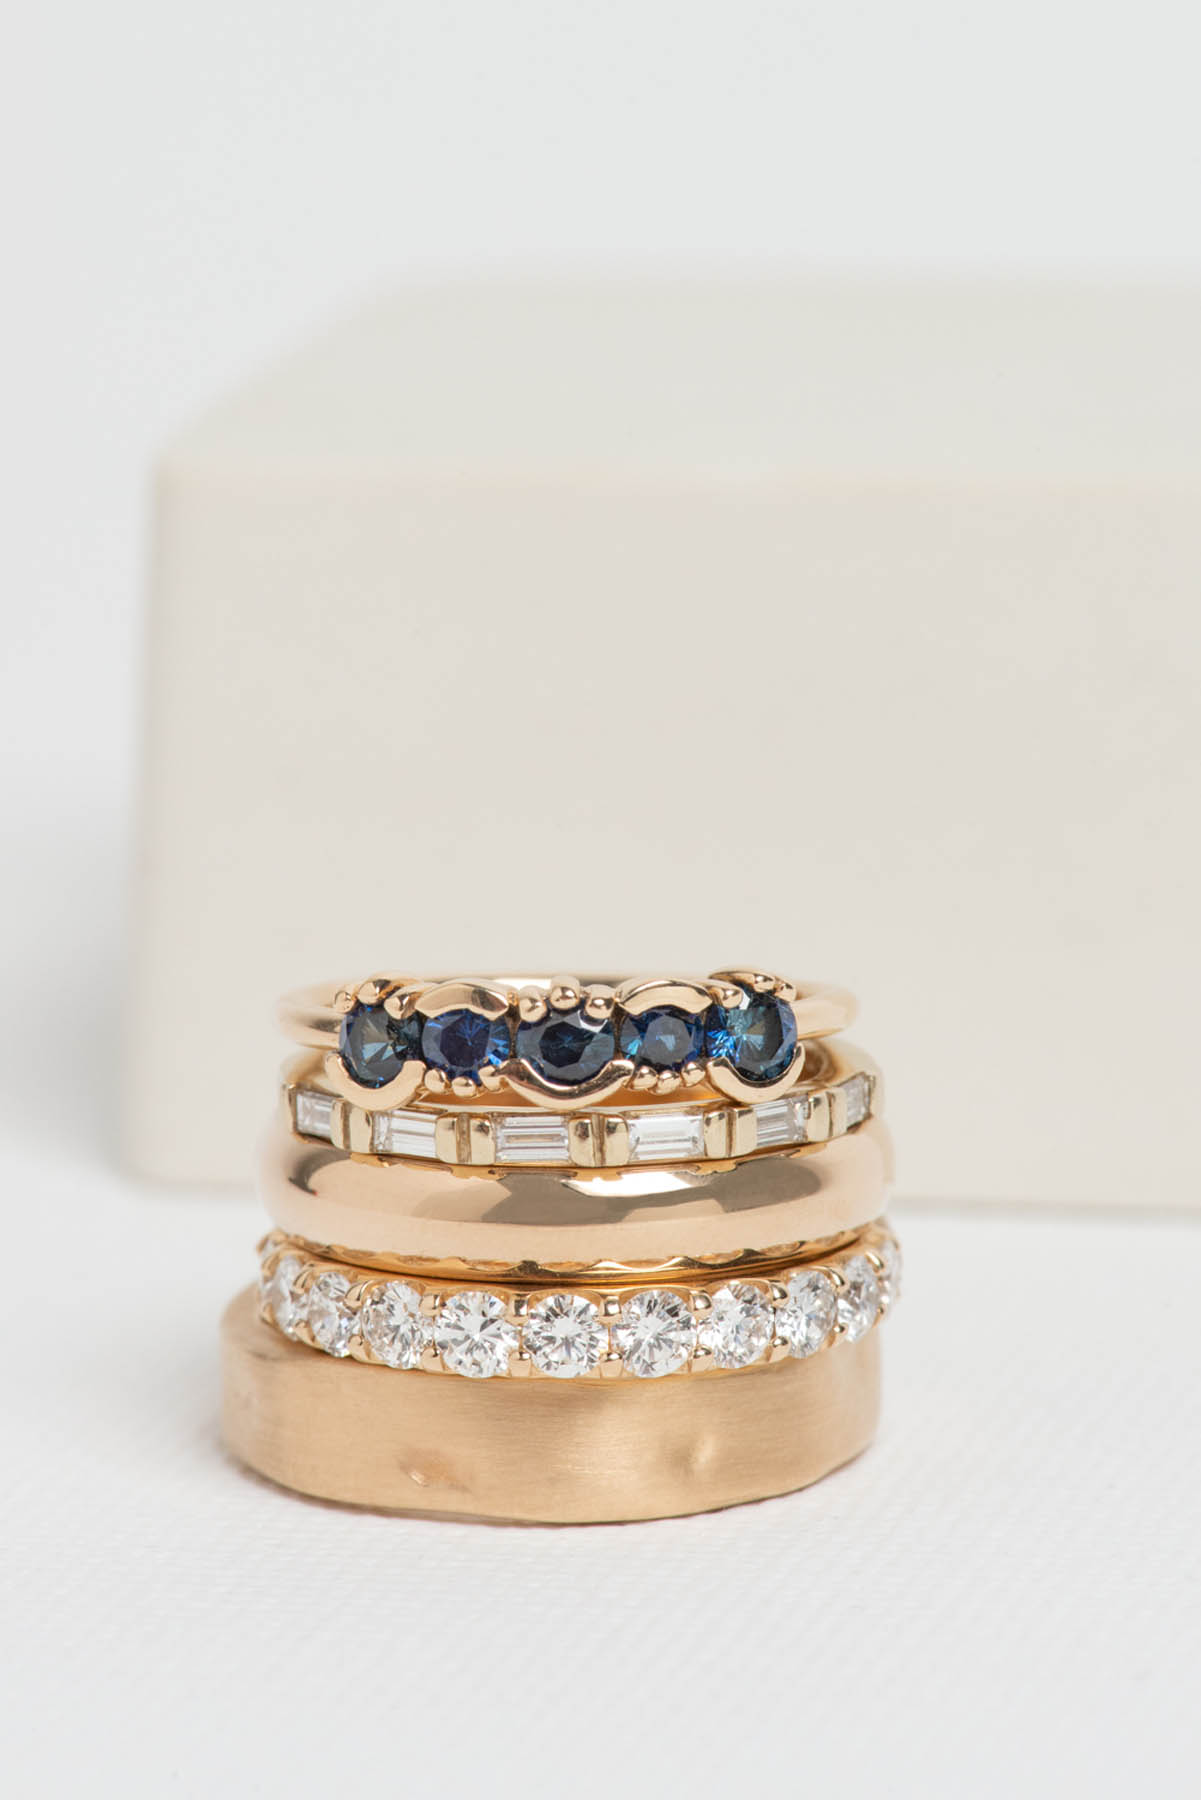 A stack of rose gold rings with blue and silver accents.